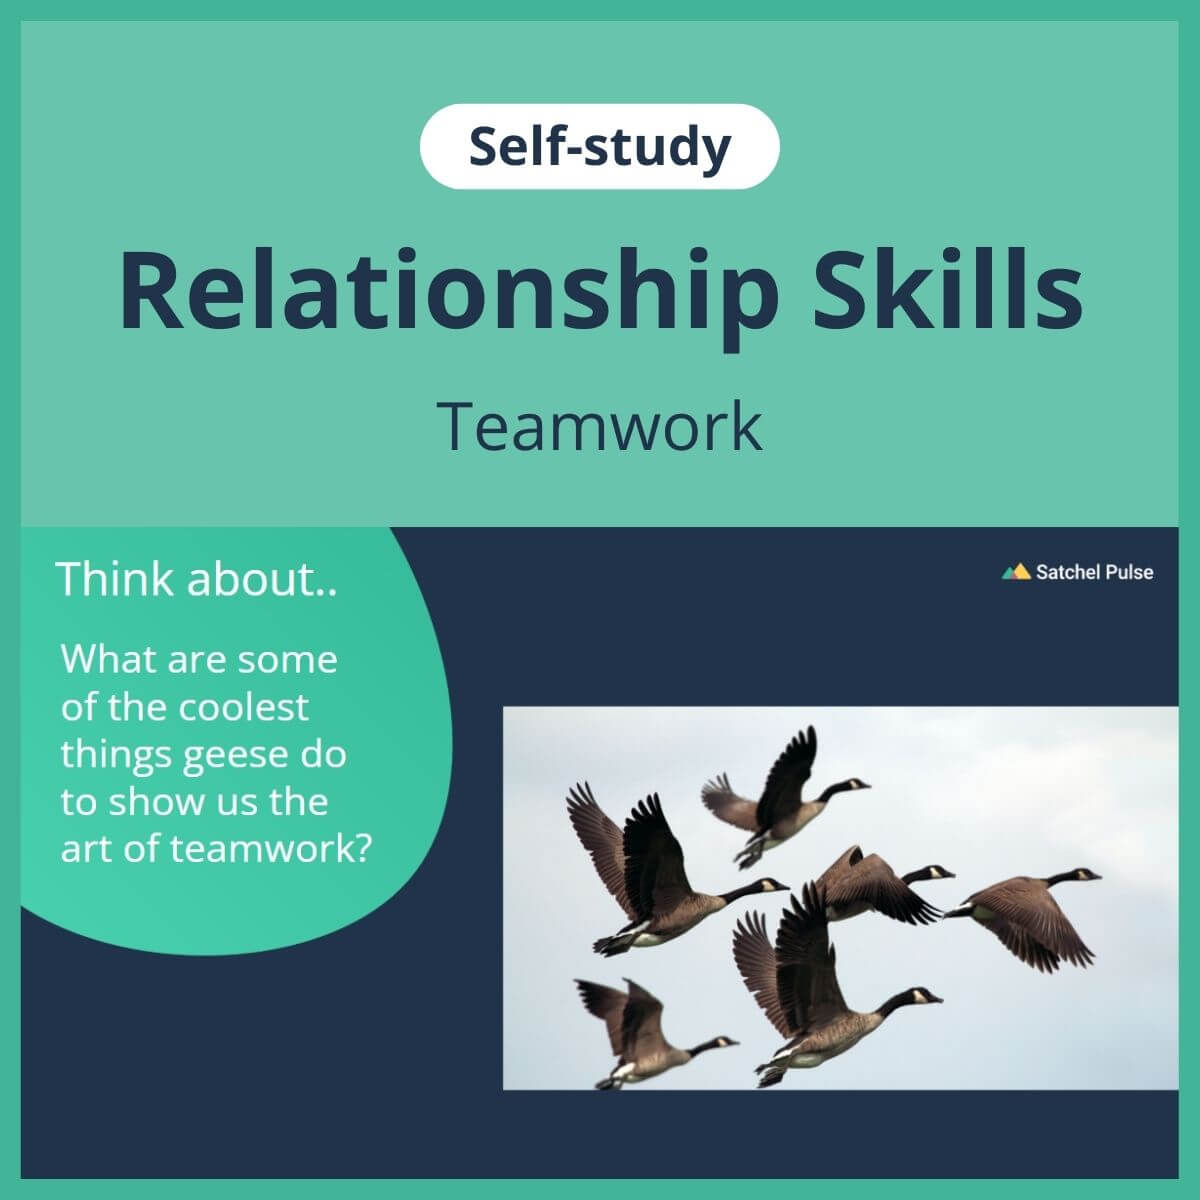 SEL self-study focusing on Team Work to use in your classroom as one of your SEL activities for Relationship Skills